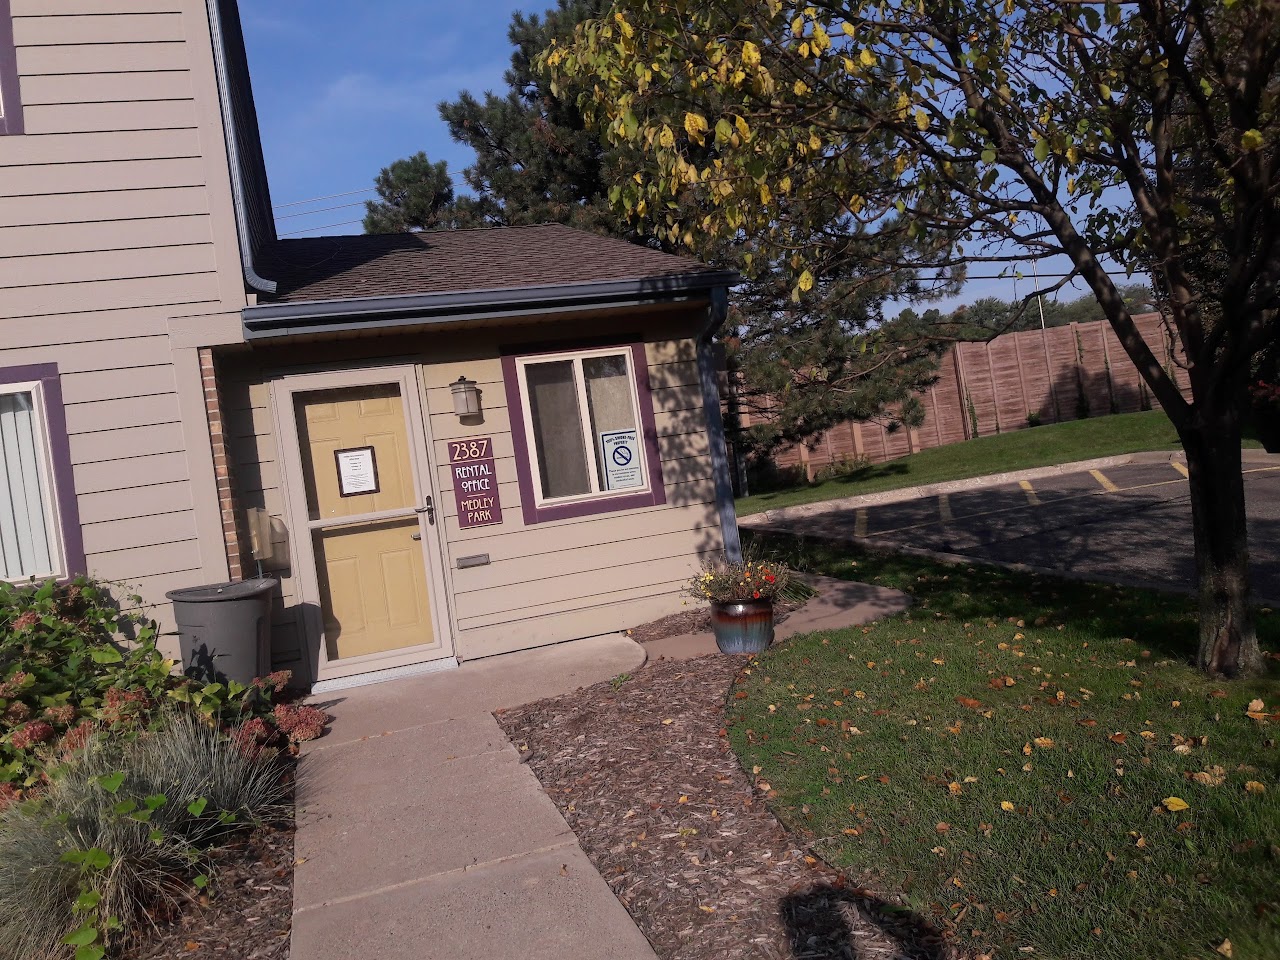 Photo of MEDLEY PARK. Affordable housing located at MULTIPLE BUILDING ADDRESSES GOLDEN VALLEY, MN 55427